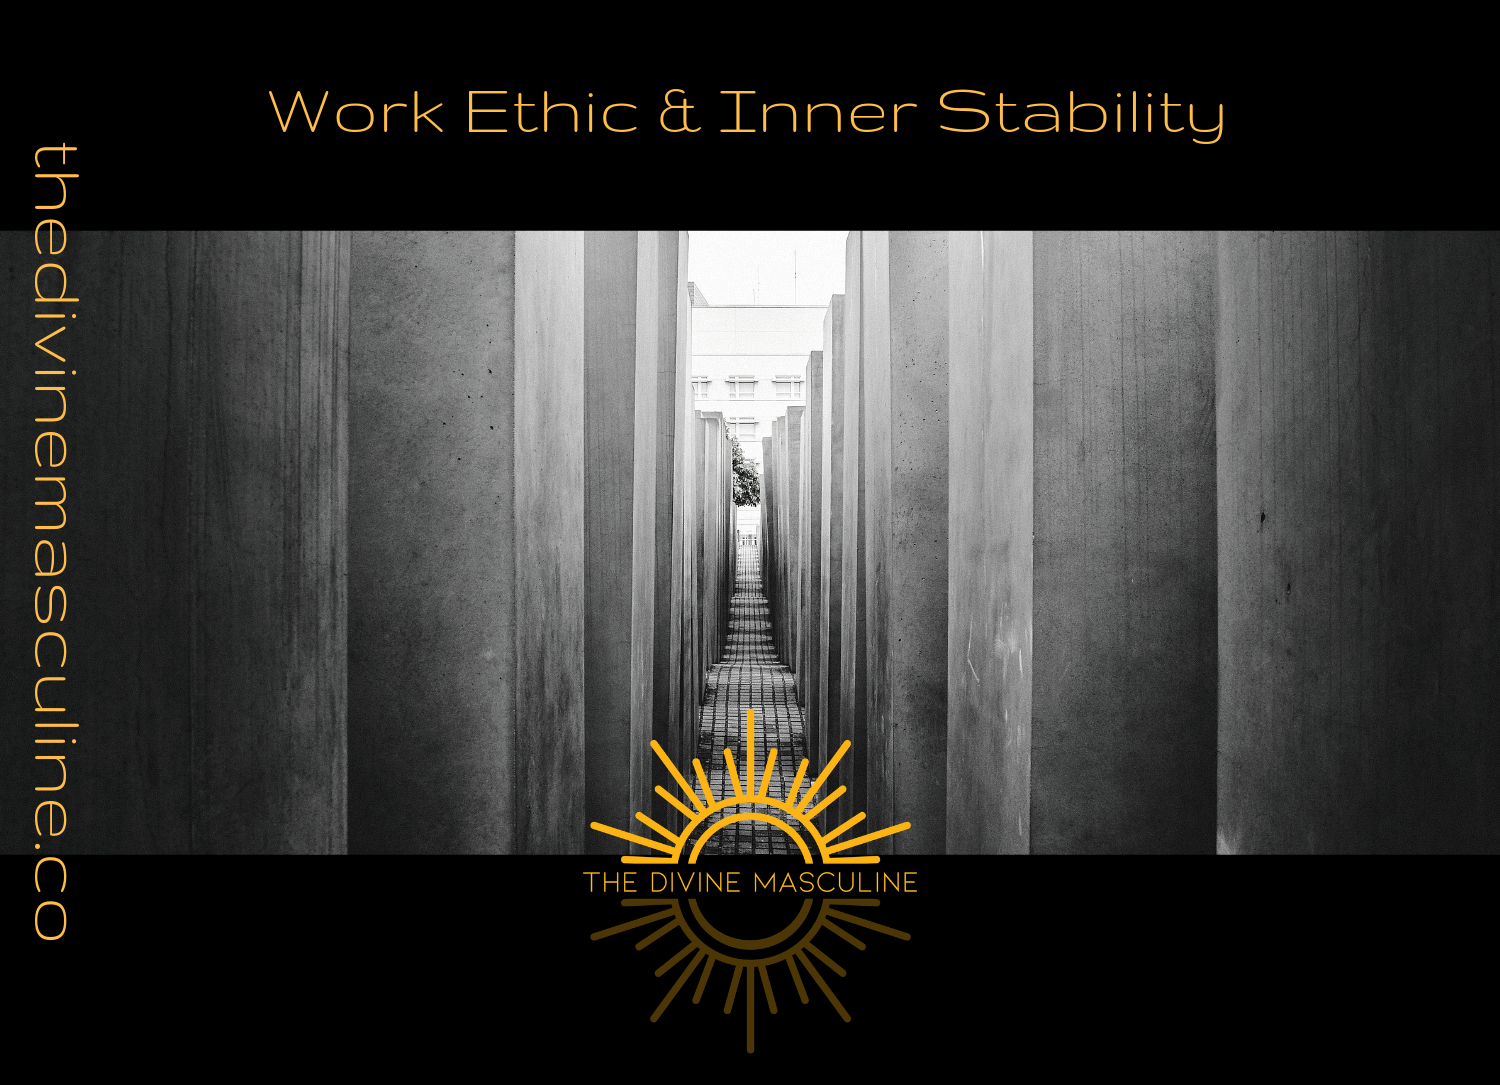 The Divine Masculine – On Work Ethic & Inner Stability